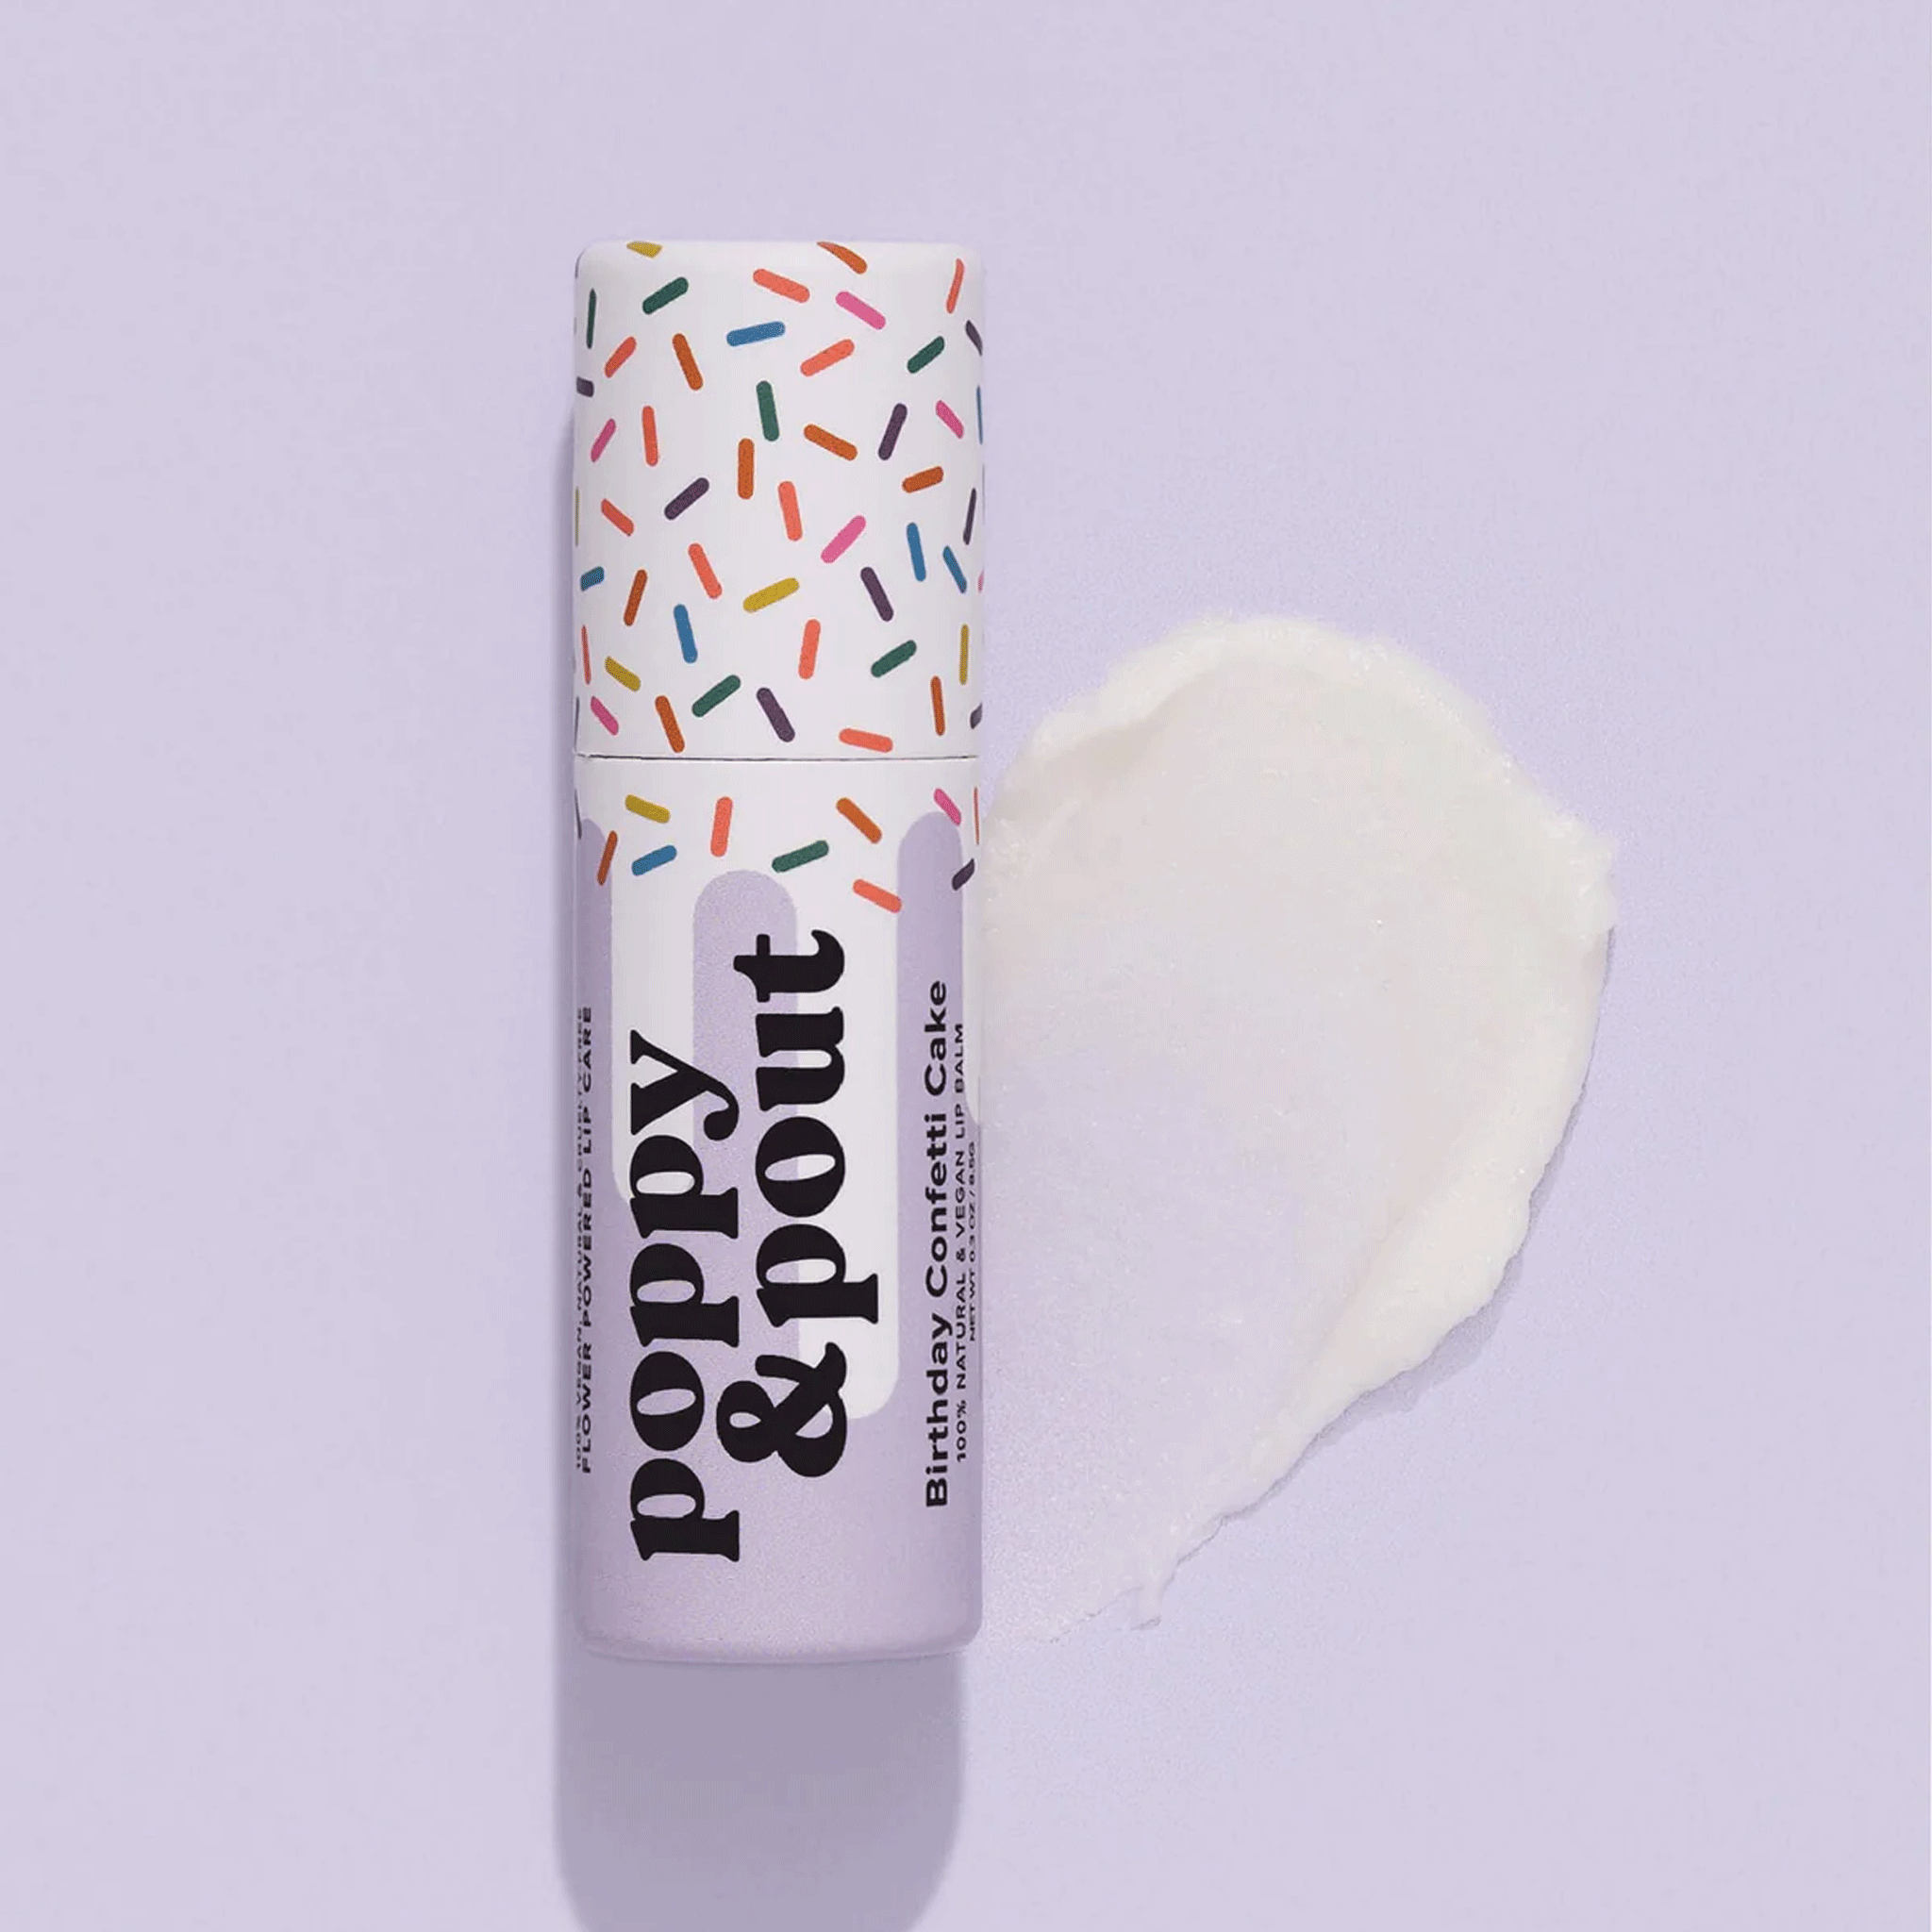 On a lavender background is a purple lip balm with a white and multi color &quot;sprinkle&quot; design with black text that reads, &quot;poopy &amp; pout birthday confetti cake&quot;.